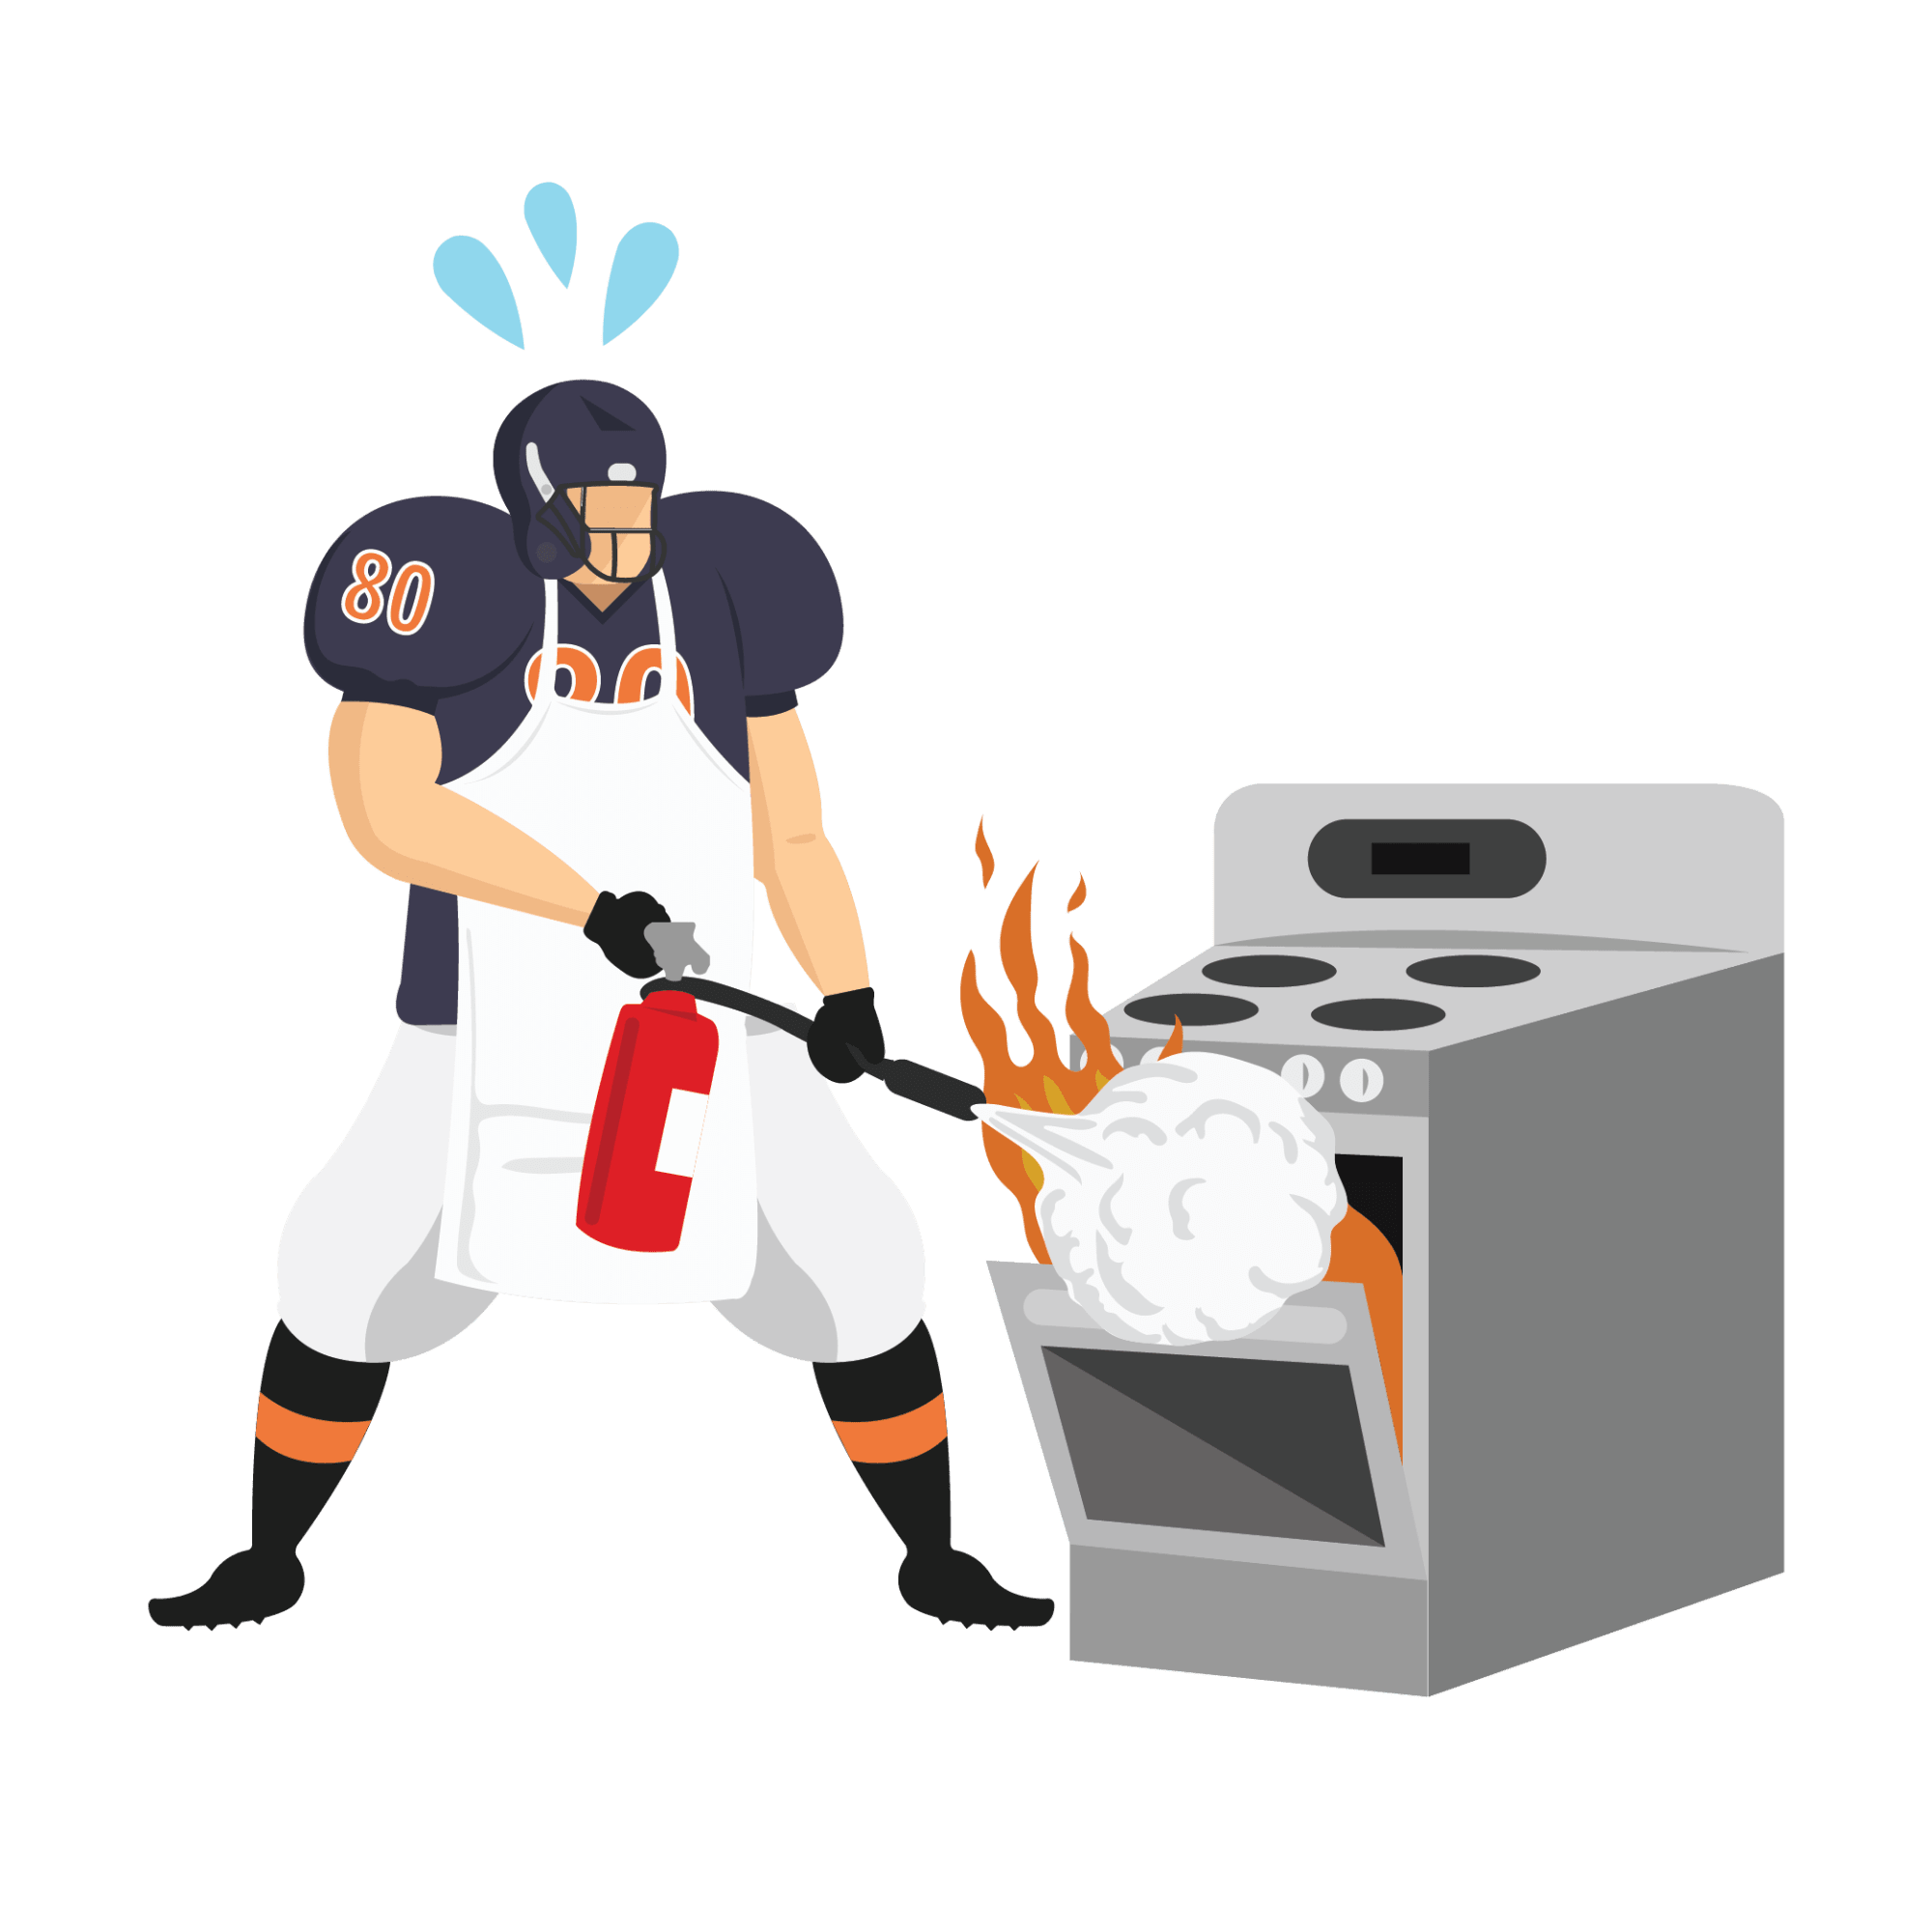 Animated football player using fire extinguisher to put out oven fire